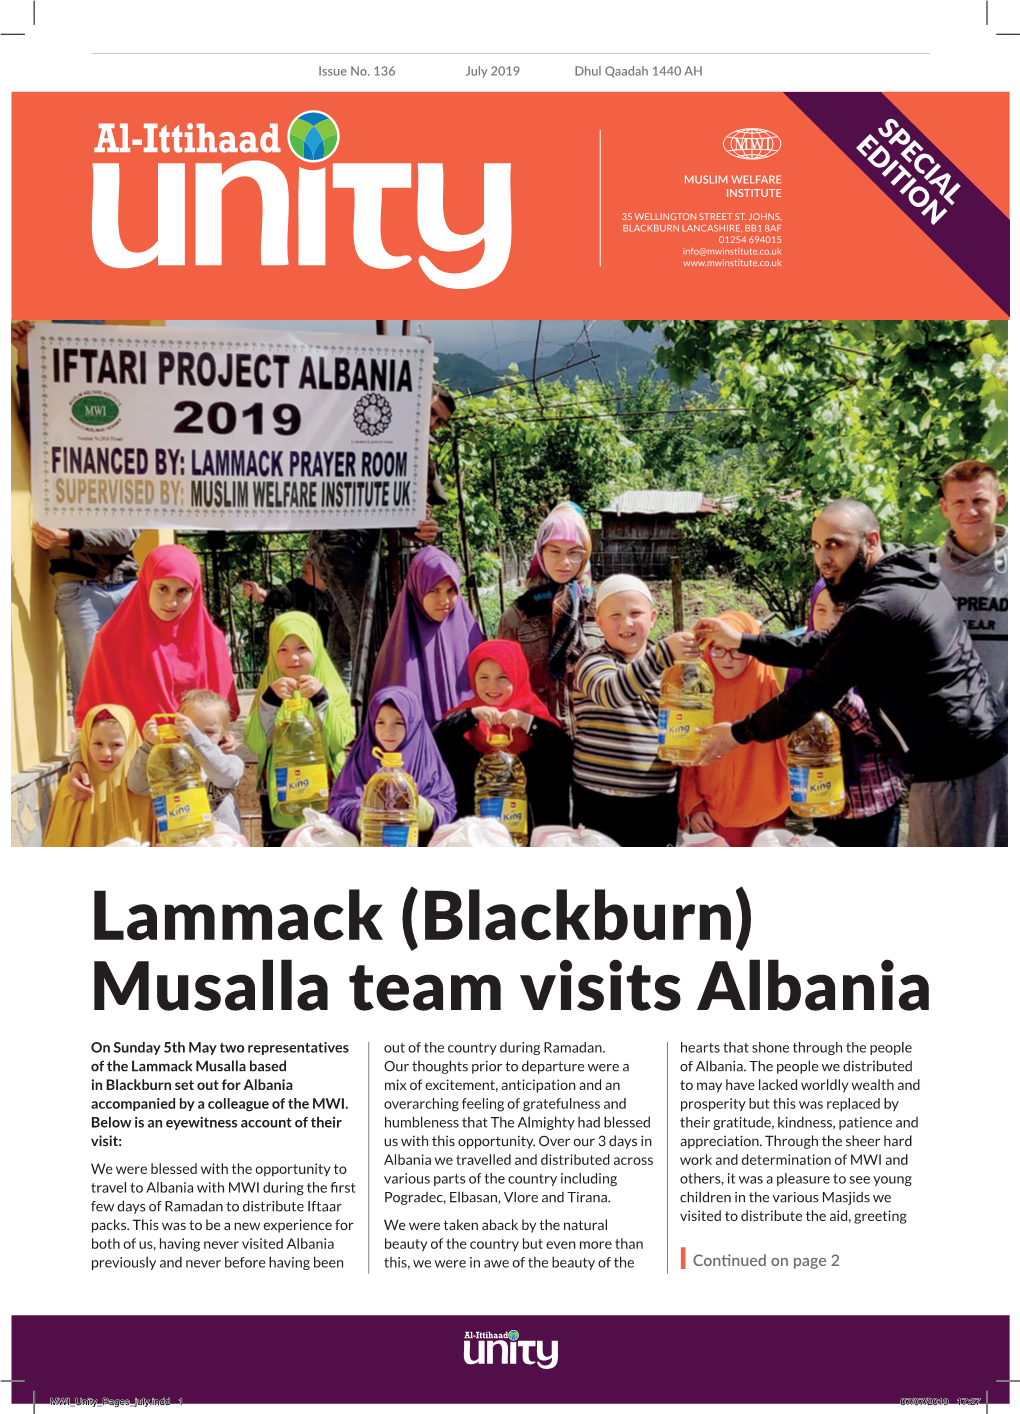 Lammack (Blackburn) Musalla Team Visits Albania on Sunday 5Th May Two Representatives out of the Country During Ramadan